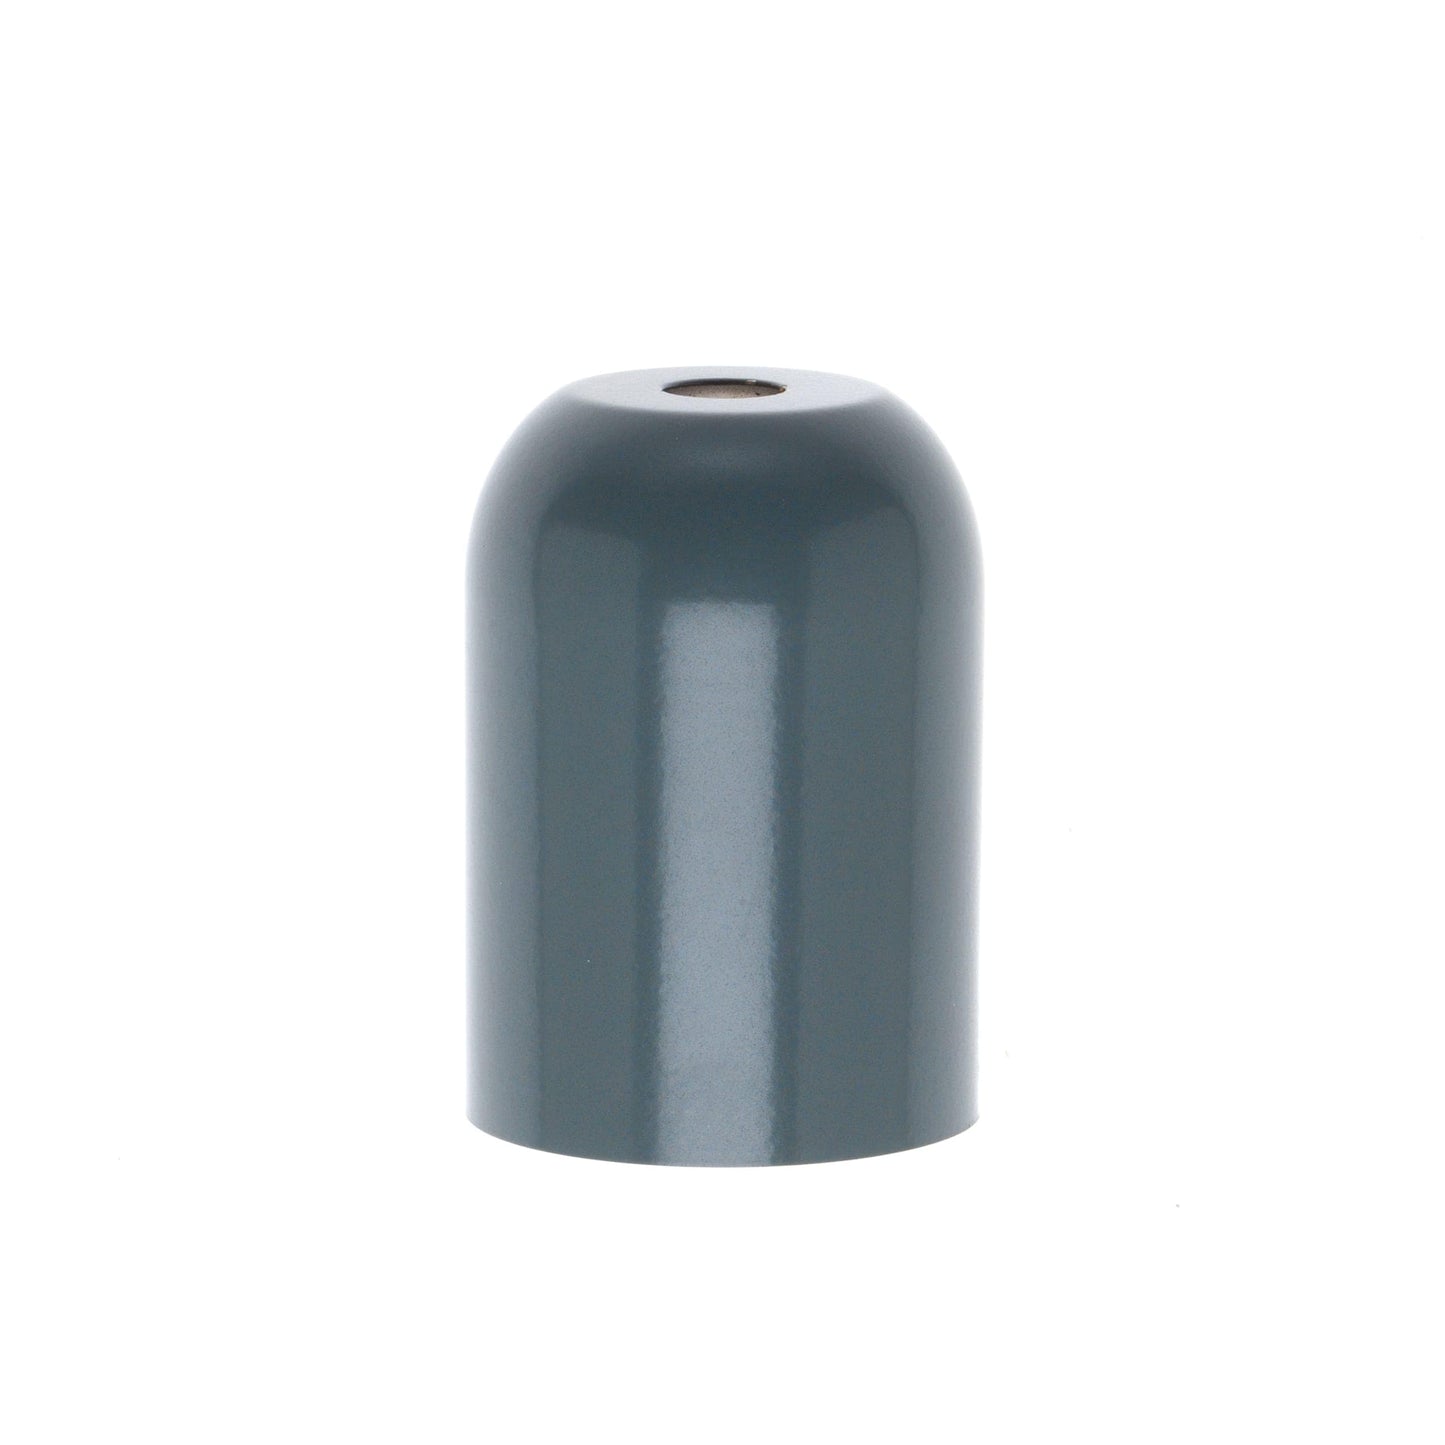 Rounded Metal Socket Cover